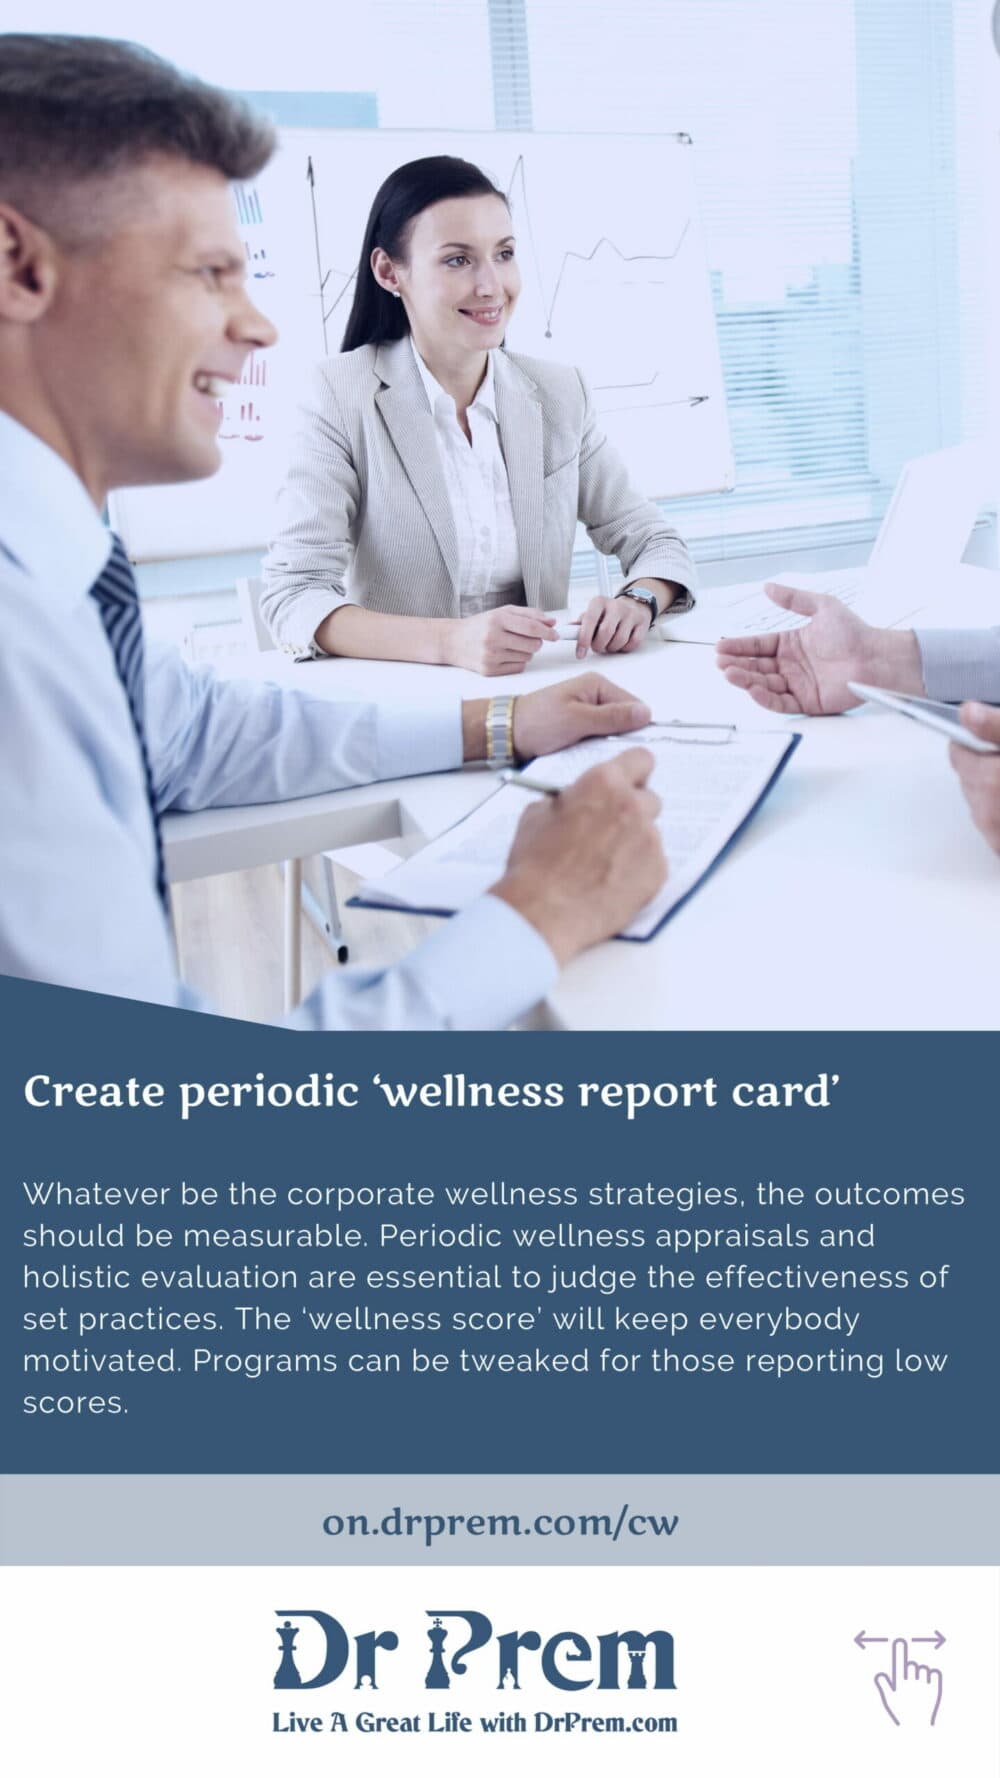 Best Corporate Culture And Wellness Practices To Drive Engagement, Productivity And Well-Being-09